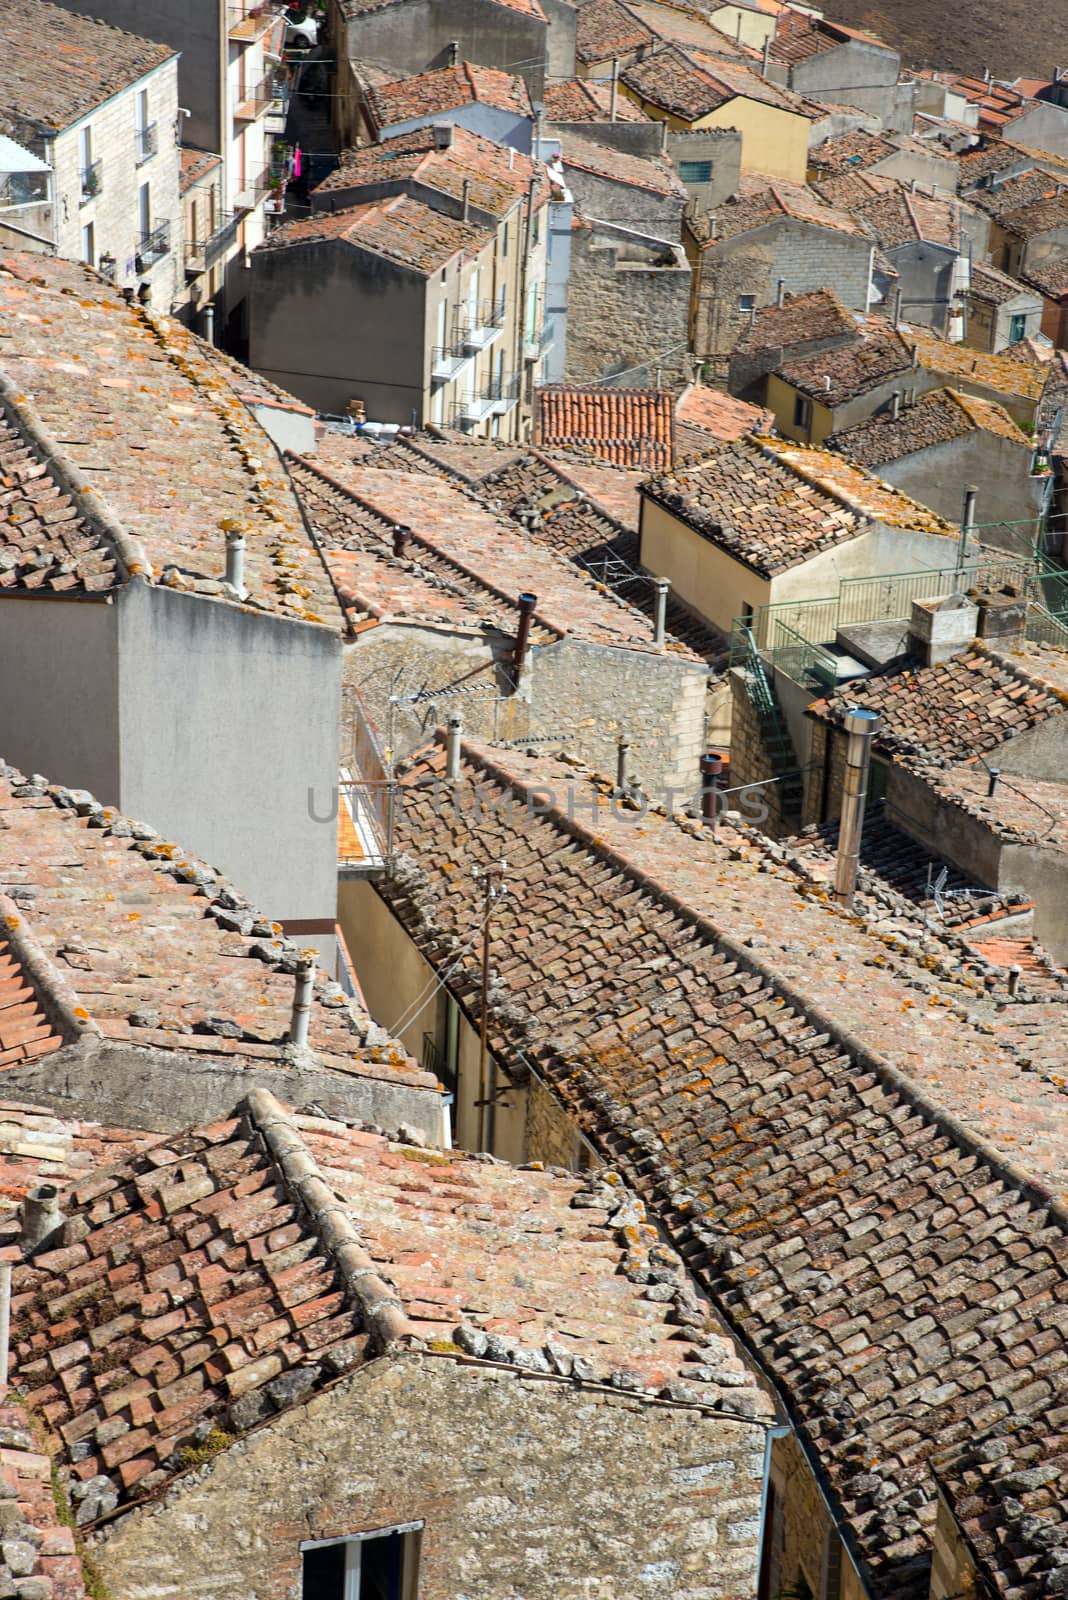 The old roofs of the village Gangi in Sicily, Italy